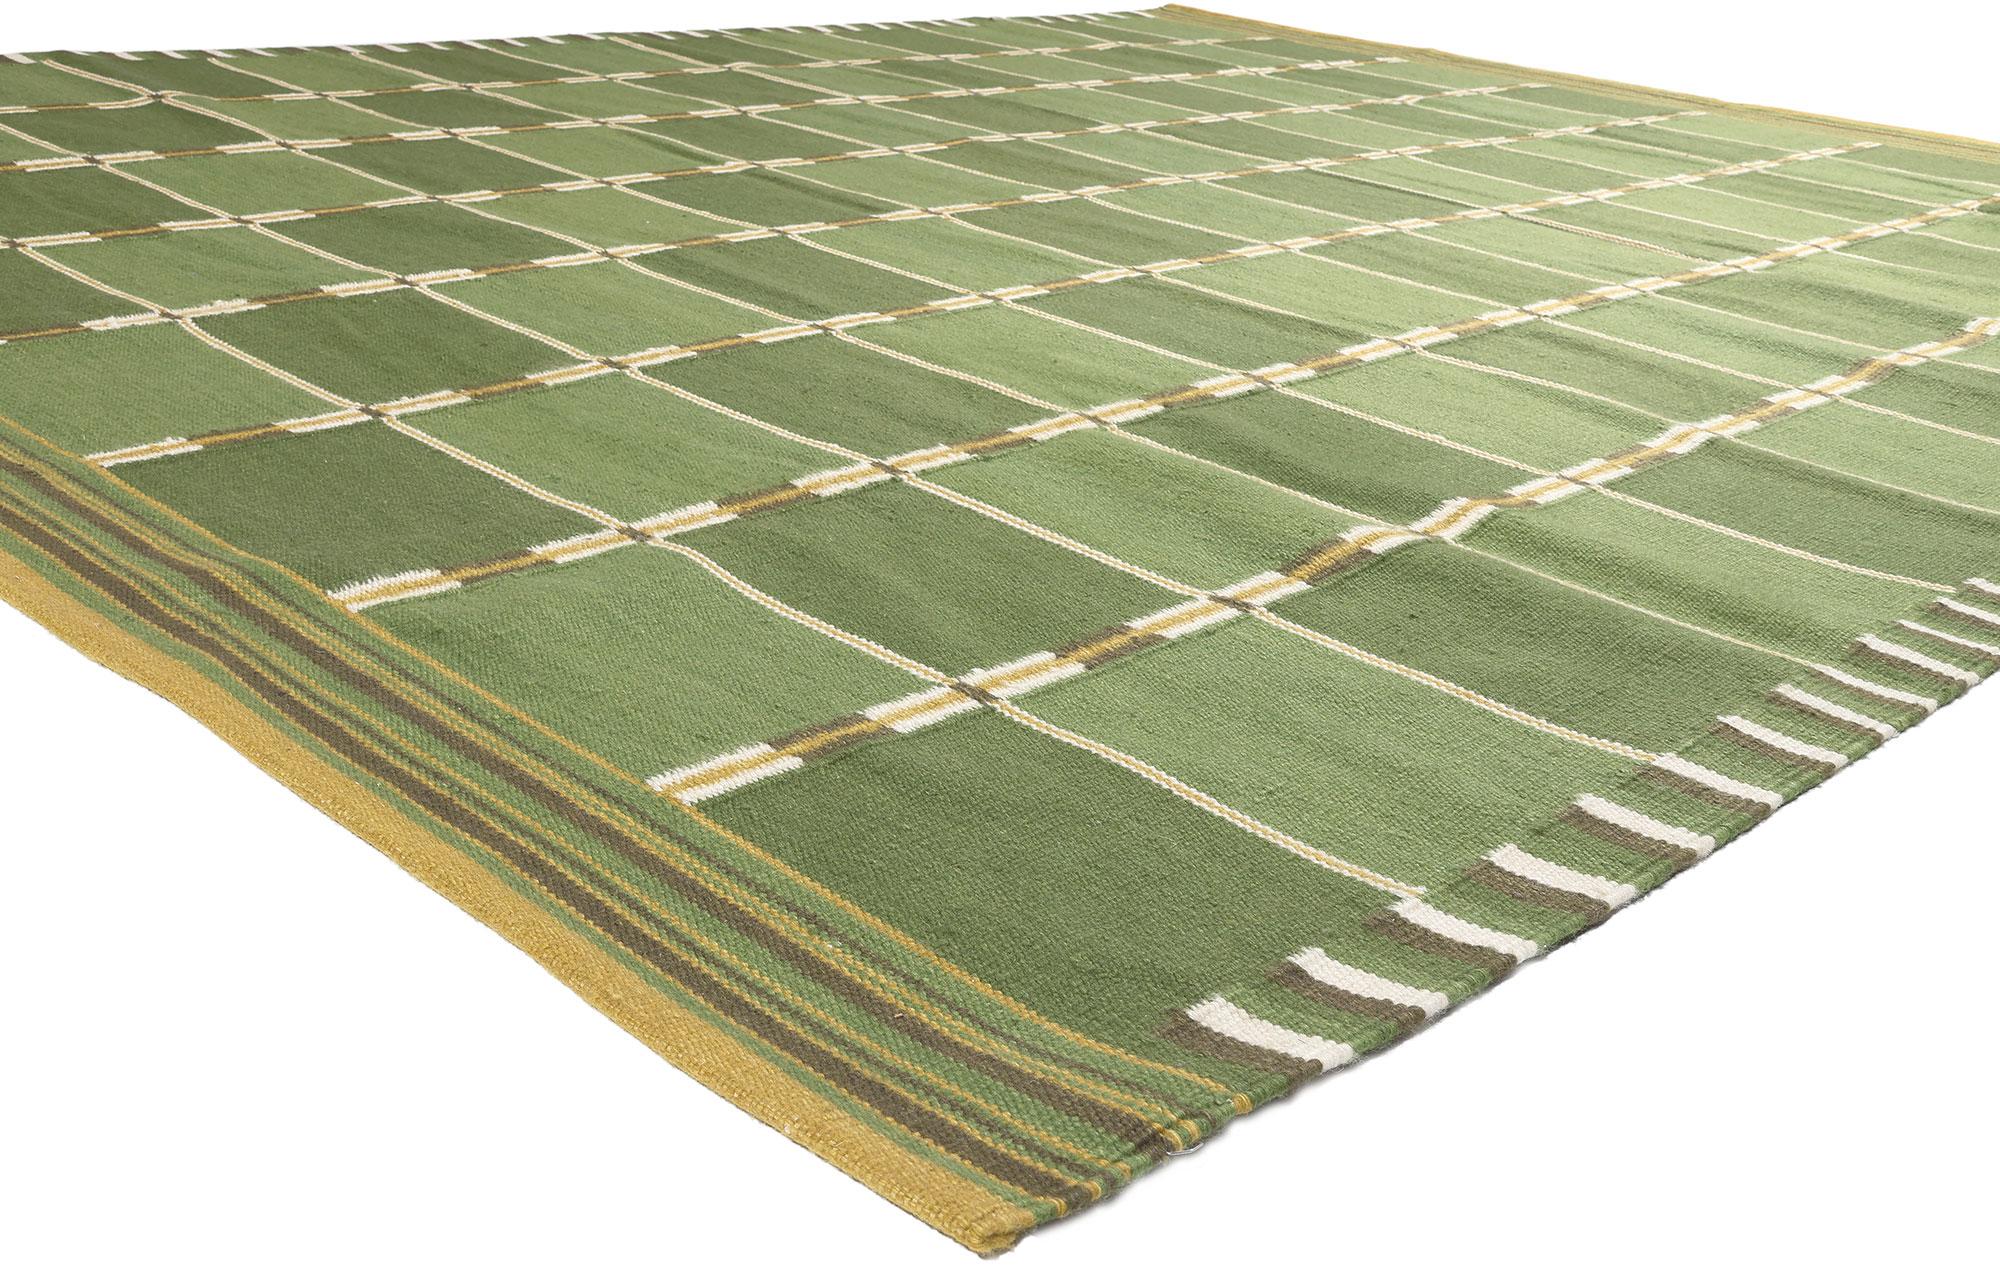 30947 New Swedish Inspired Kilim Rug, 10'03 x 12'10.
Showcasing the bolder side of Scandinavian design, this handwoven Swedish style kilim rug is a captivating vision of woven beauty. The eye-catching checked design and green hues woven into this